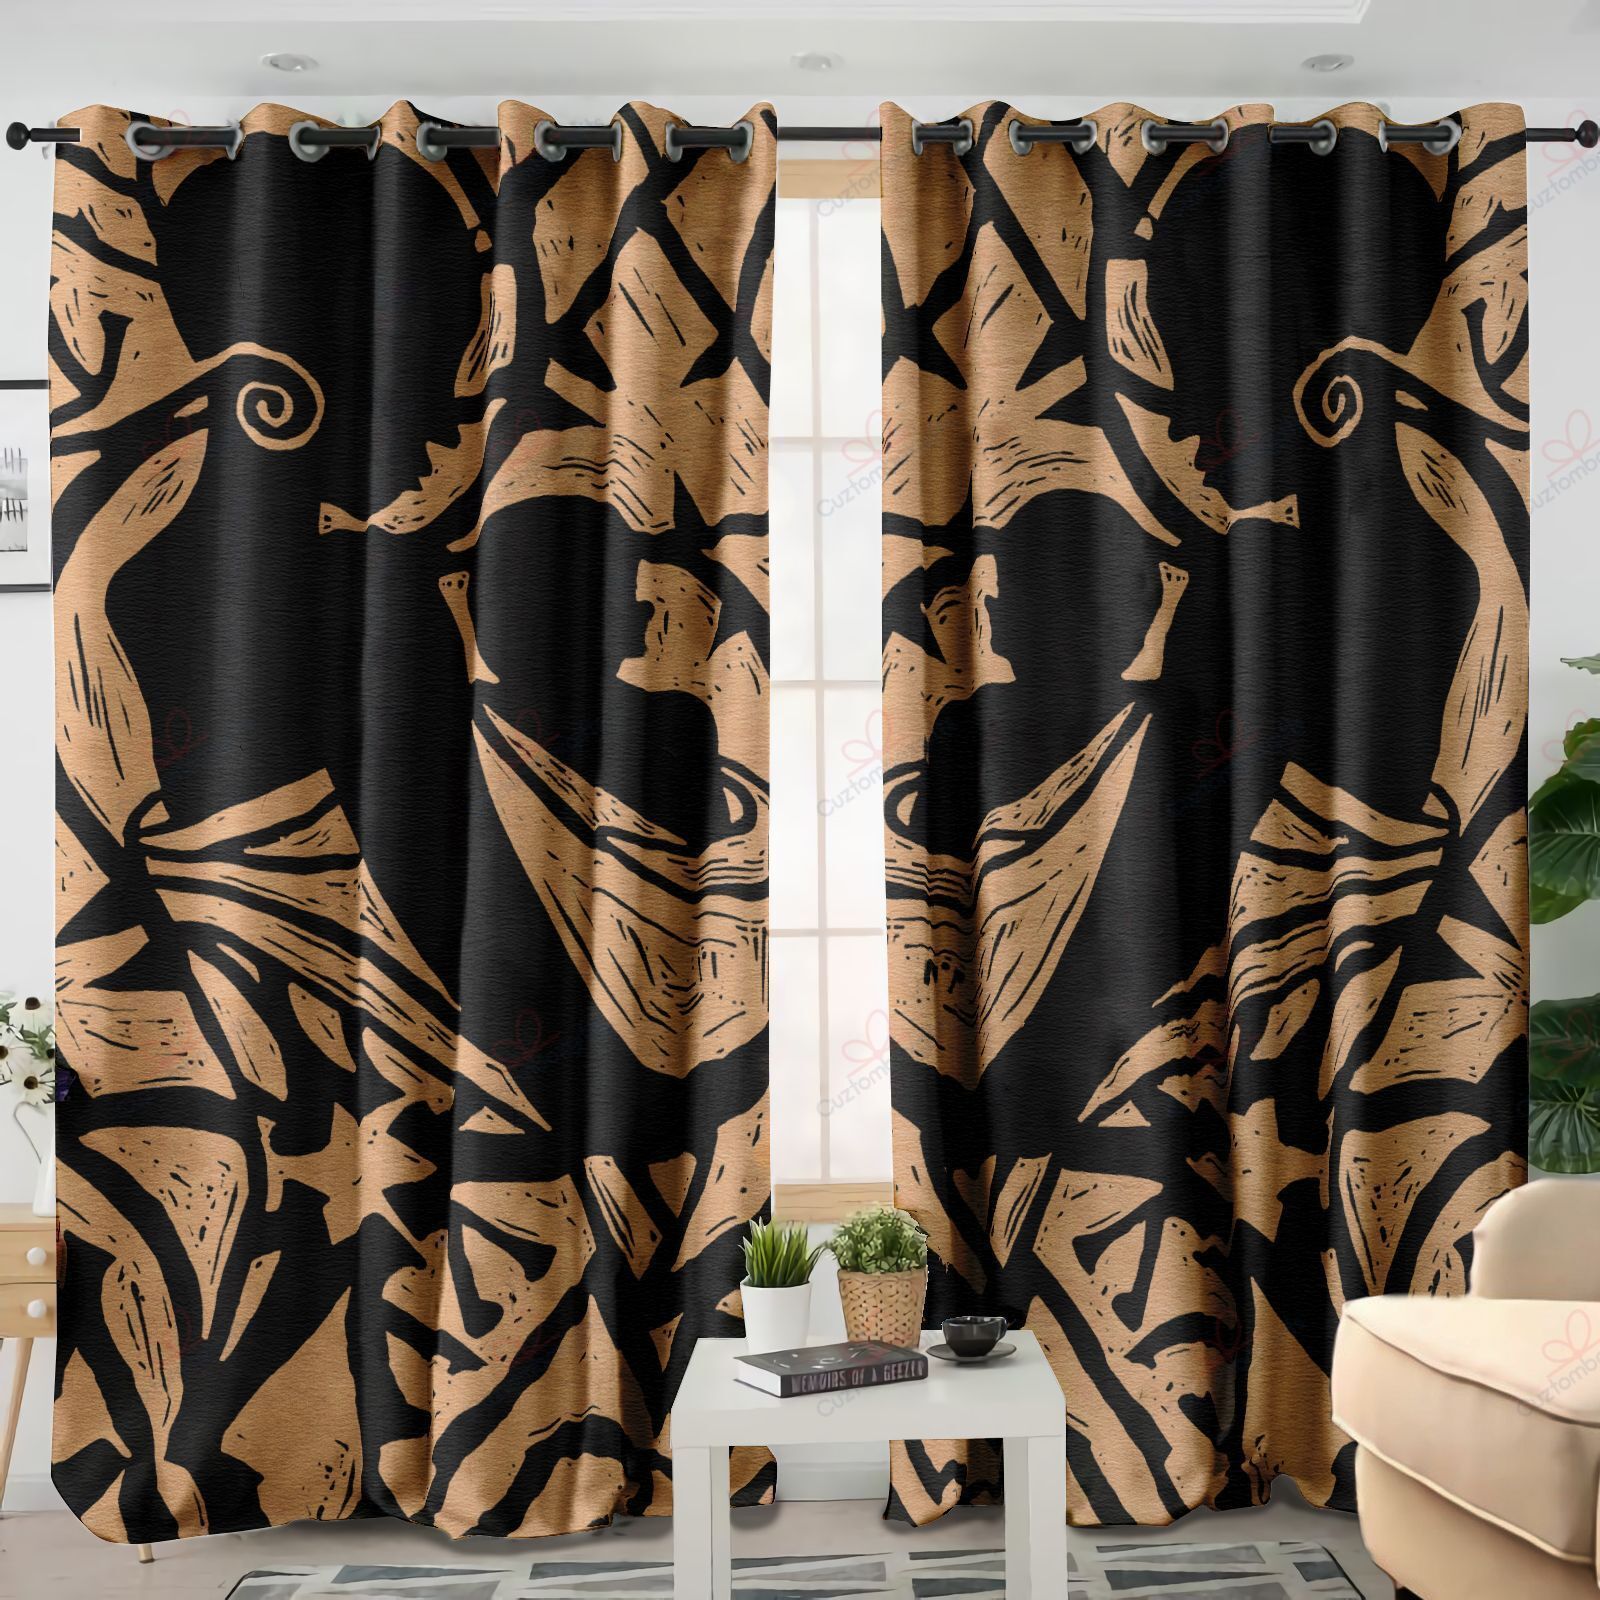 African Mother Printed Window Curtain Home Decor